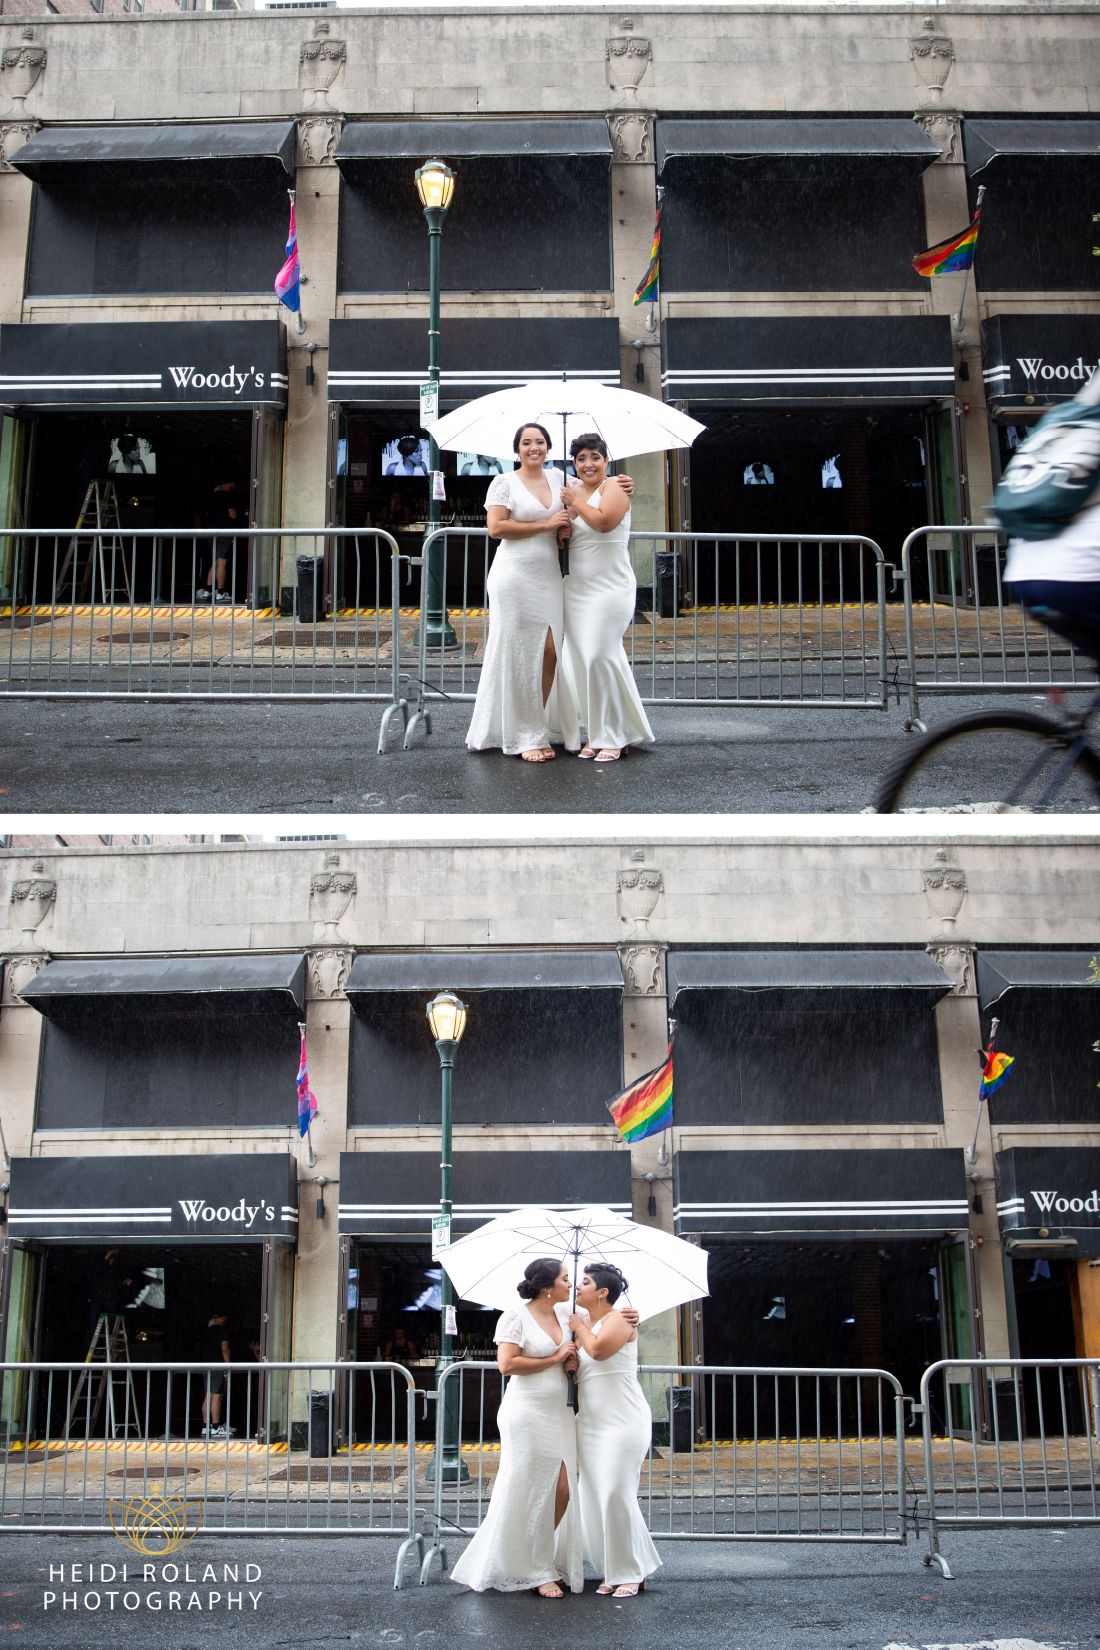 Two brides with umbrellas in front of Woody's Philadelphia